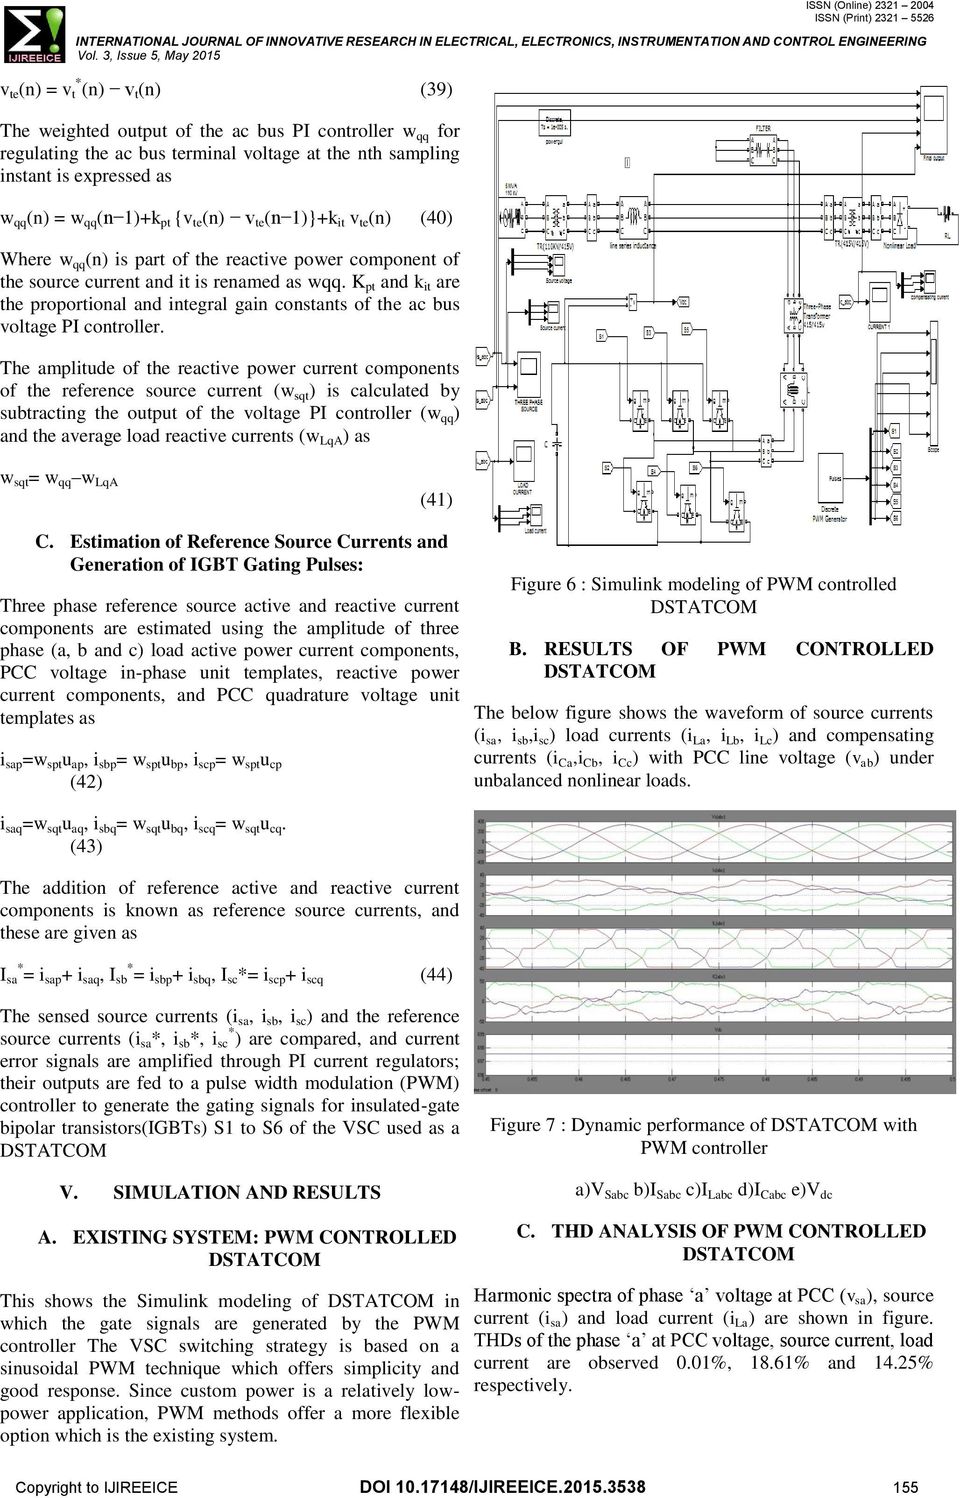 K pt and k it are the proportional and integral gain constants of the ac bus voltage PI controller.